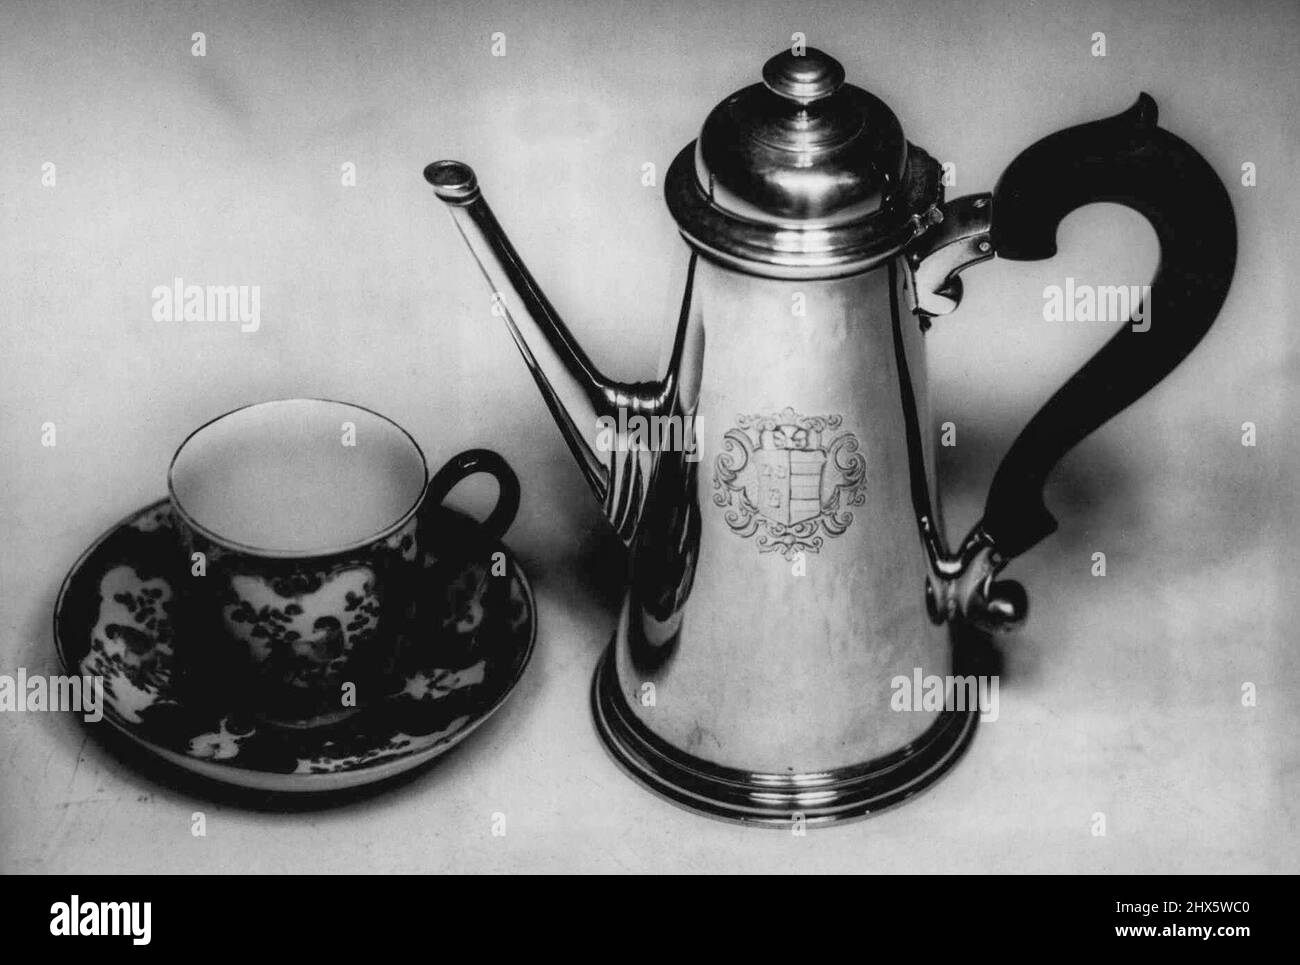 Brought to Australia in 1832 by the Hamersley family one of the earliest pioneering families to settle in Western Australia and whose coat of arms is engraved upon it, this glistening silver coffee pot was made in 1727, during reign of George II. With it is a Georgian cup and saucer. Fashioned by the fine silversmith Edward Vincent, this gracefully elegant example of silver ware bears the London hallmark, the leopard's head crowned and the date letter, a Roman capital 'M,' authenticating the time it was made, which, incidentally, was the same year that Sir Thomas Gainsbor ough was born. The Stock Photo